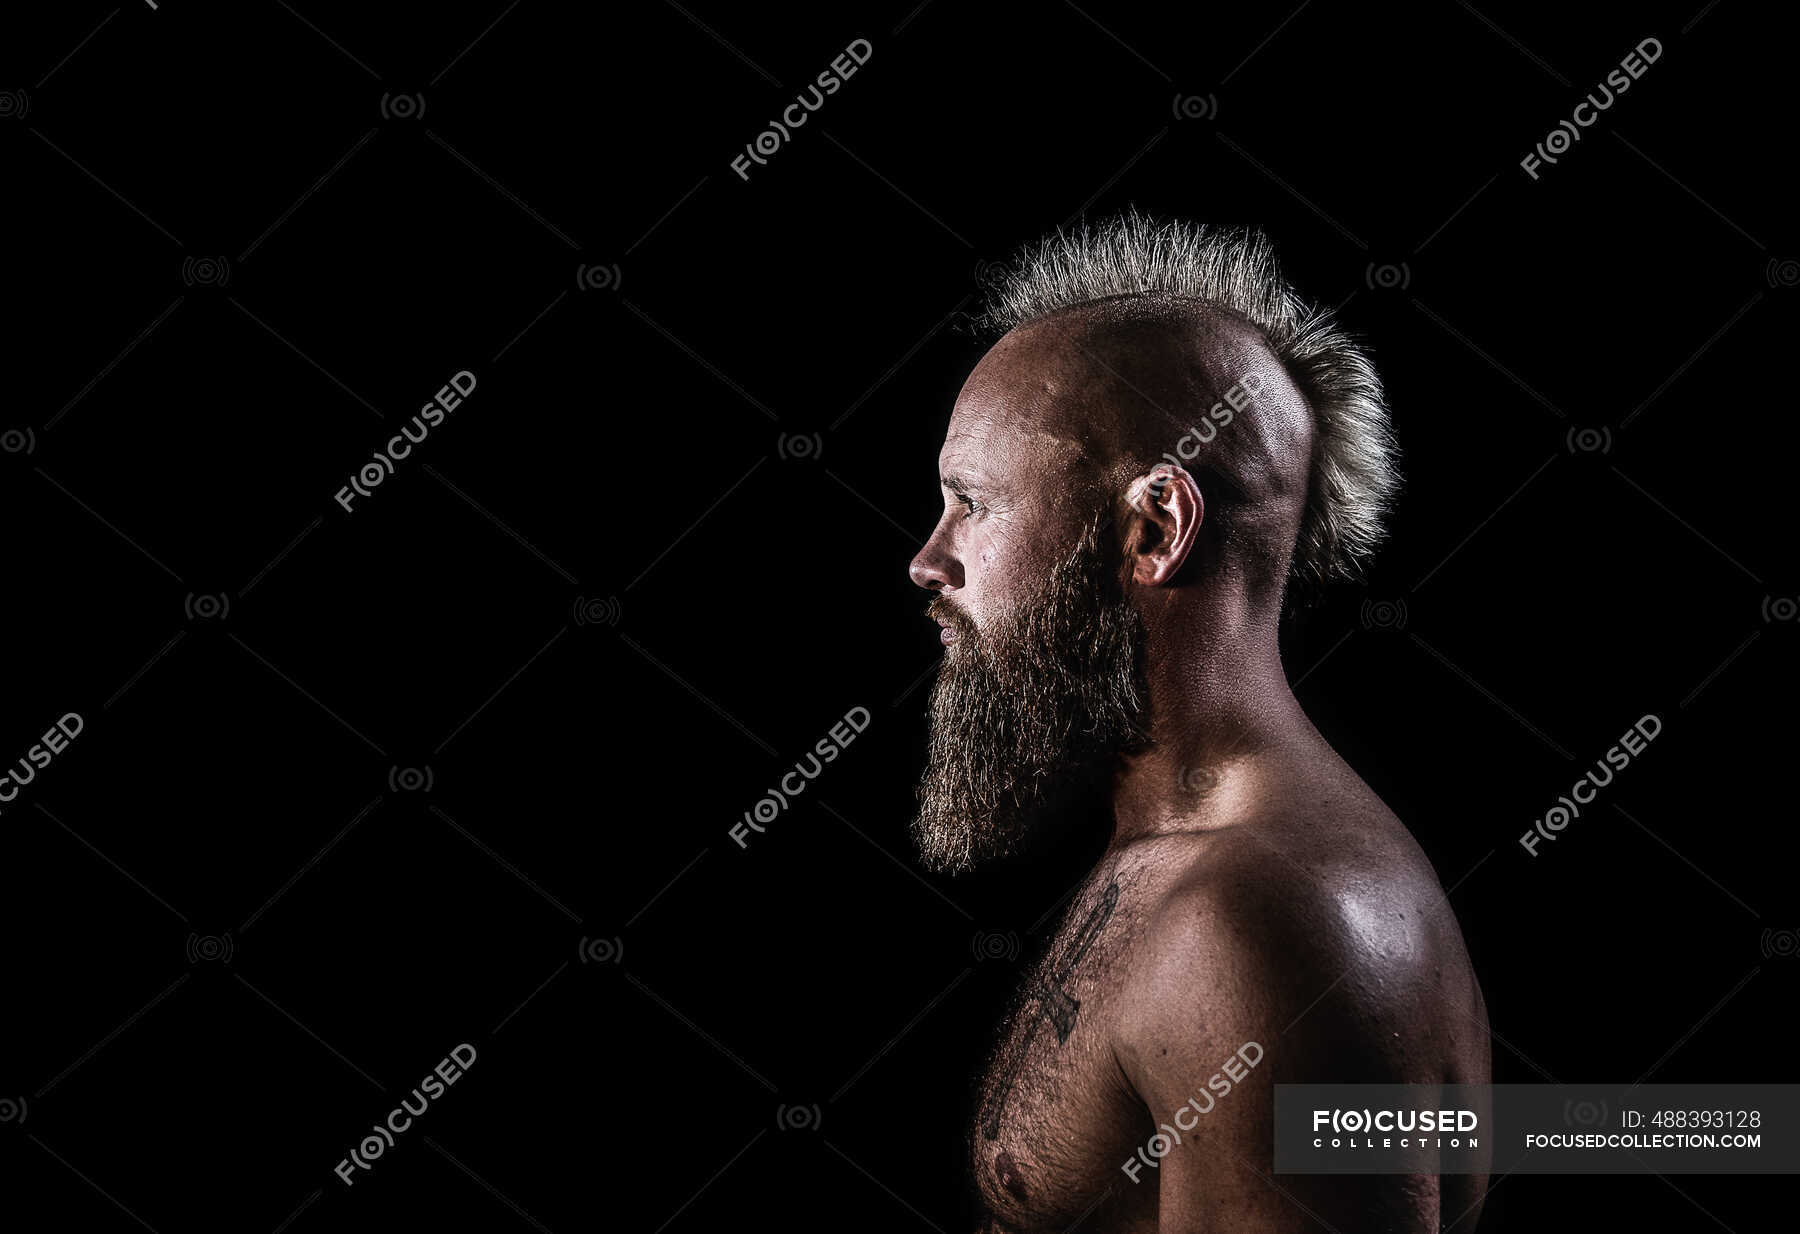 Male viking with mohawk hairstyle standing against black background — one  person, caucasian - Stock Photo | #488393128